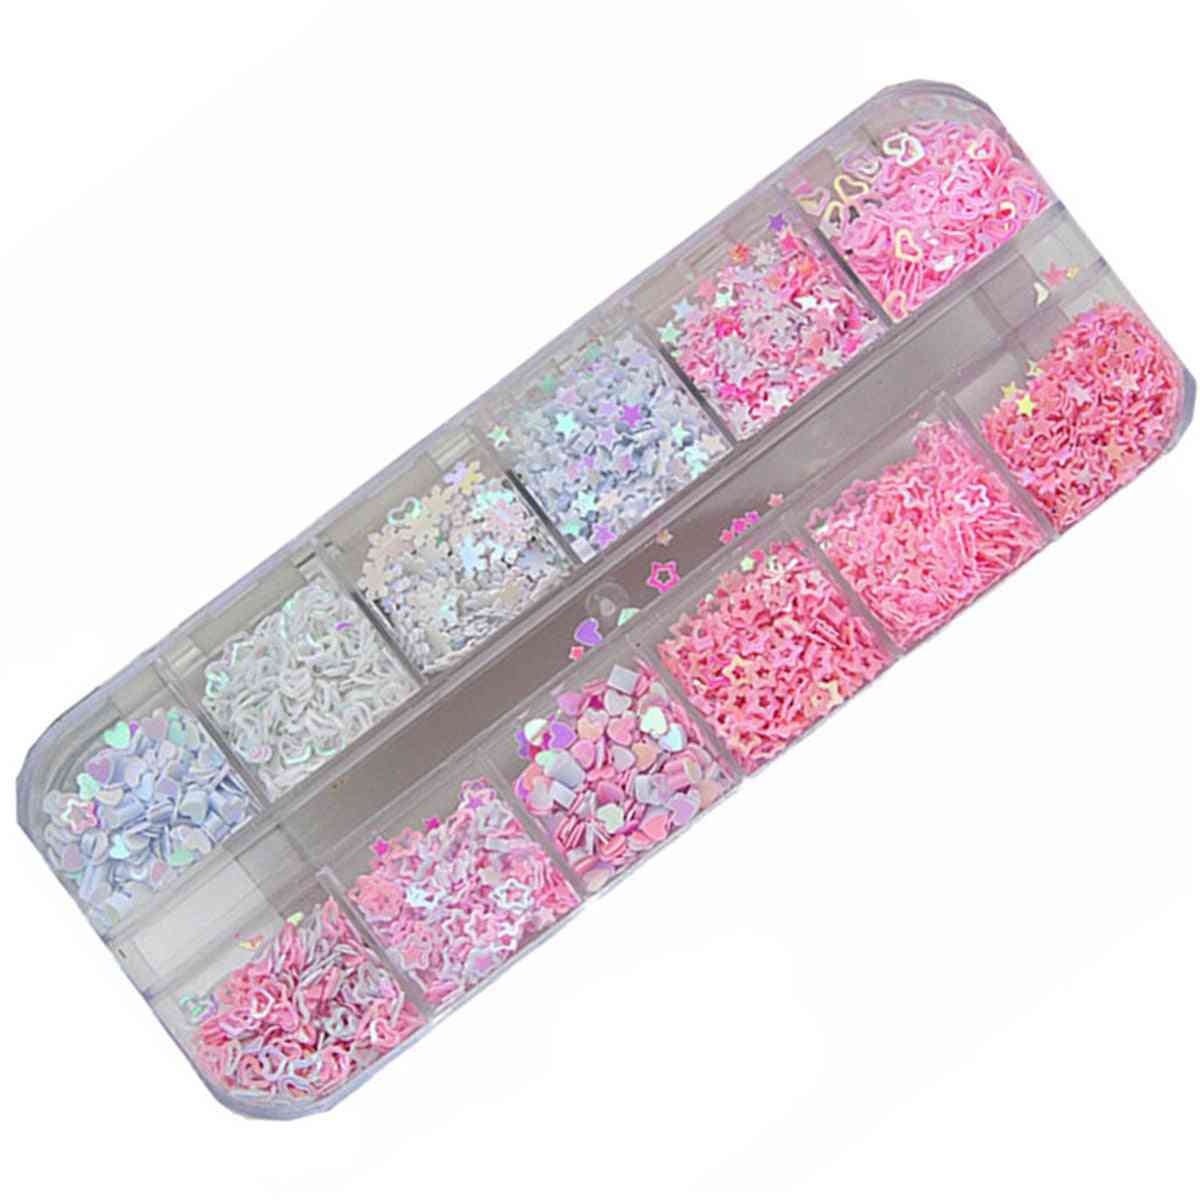 Sequins Holographic Holo Love Star Pink White Nail Body Art Glitter Box, Sequin Nails Paillette Flakes Decoration Manicure Tools